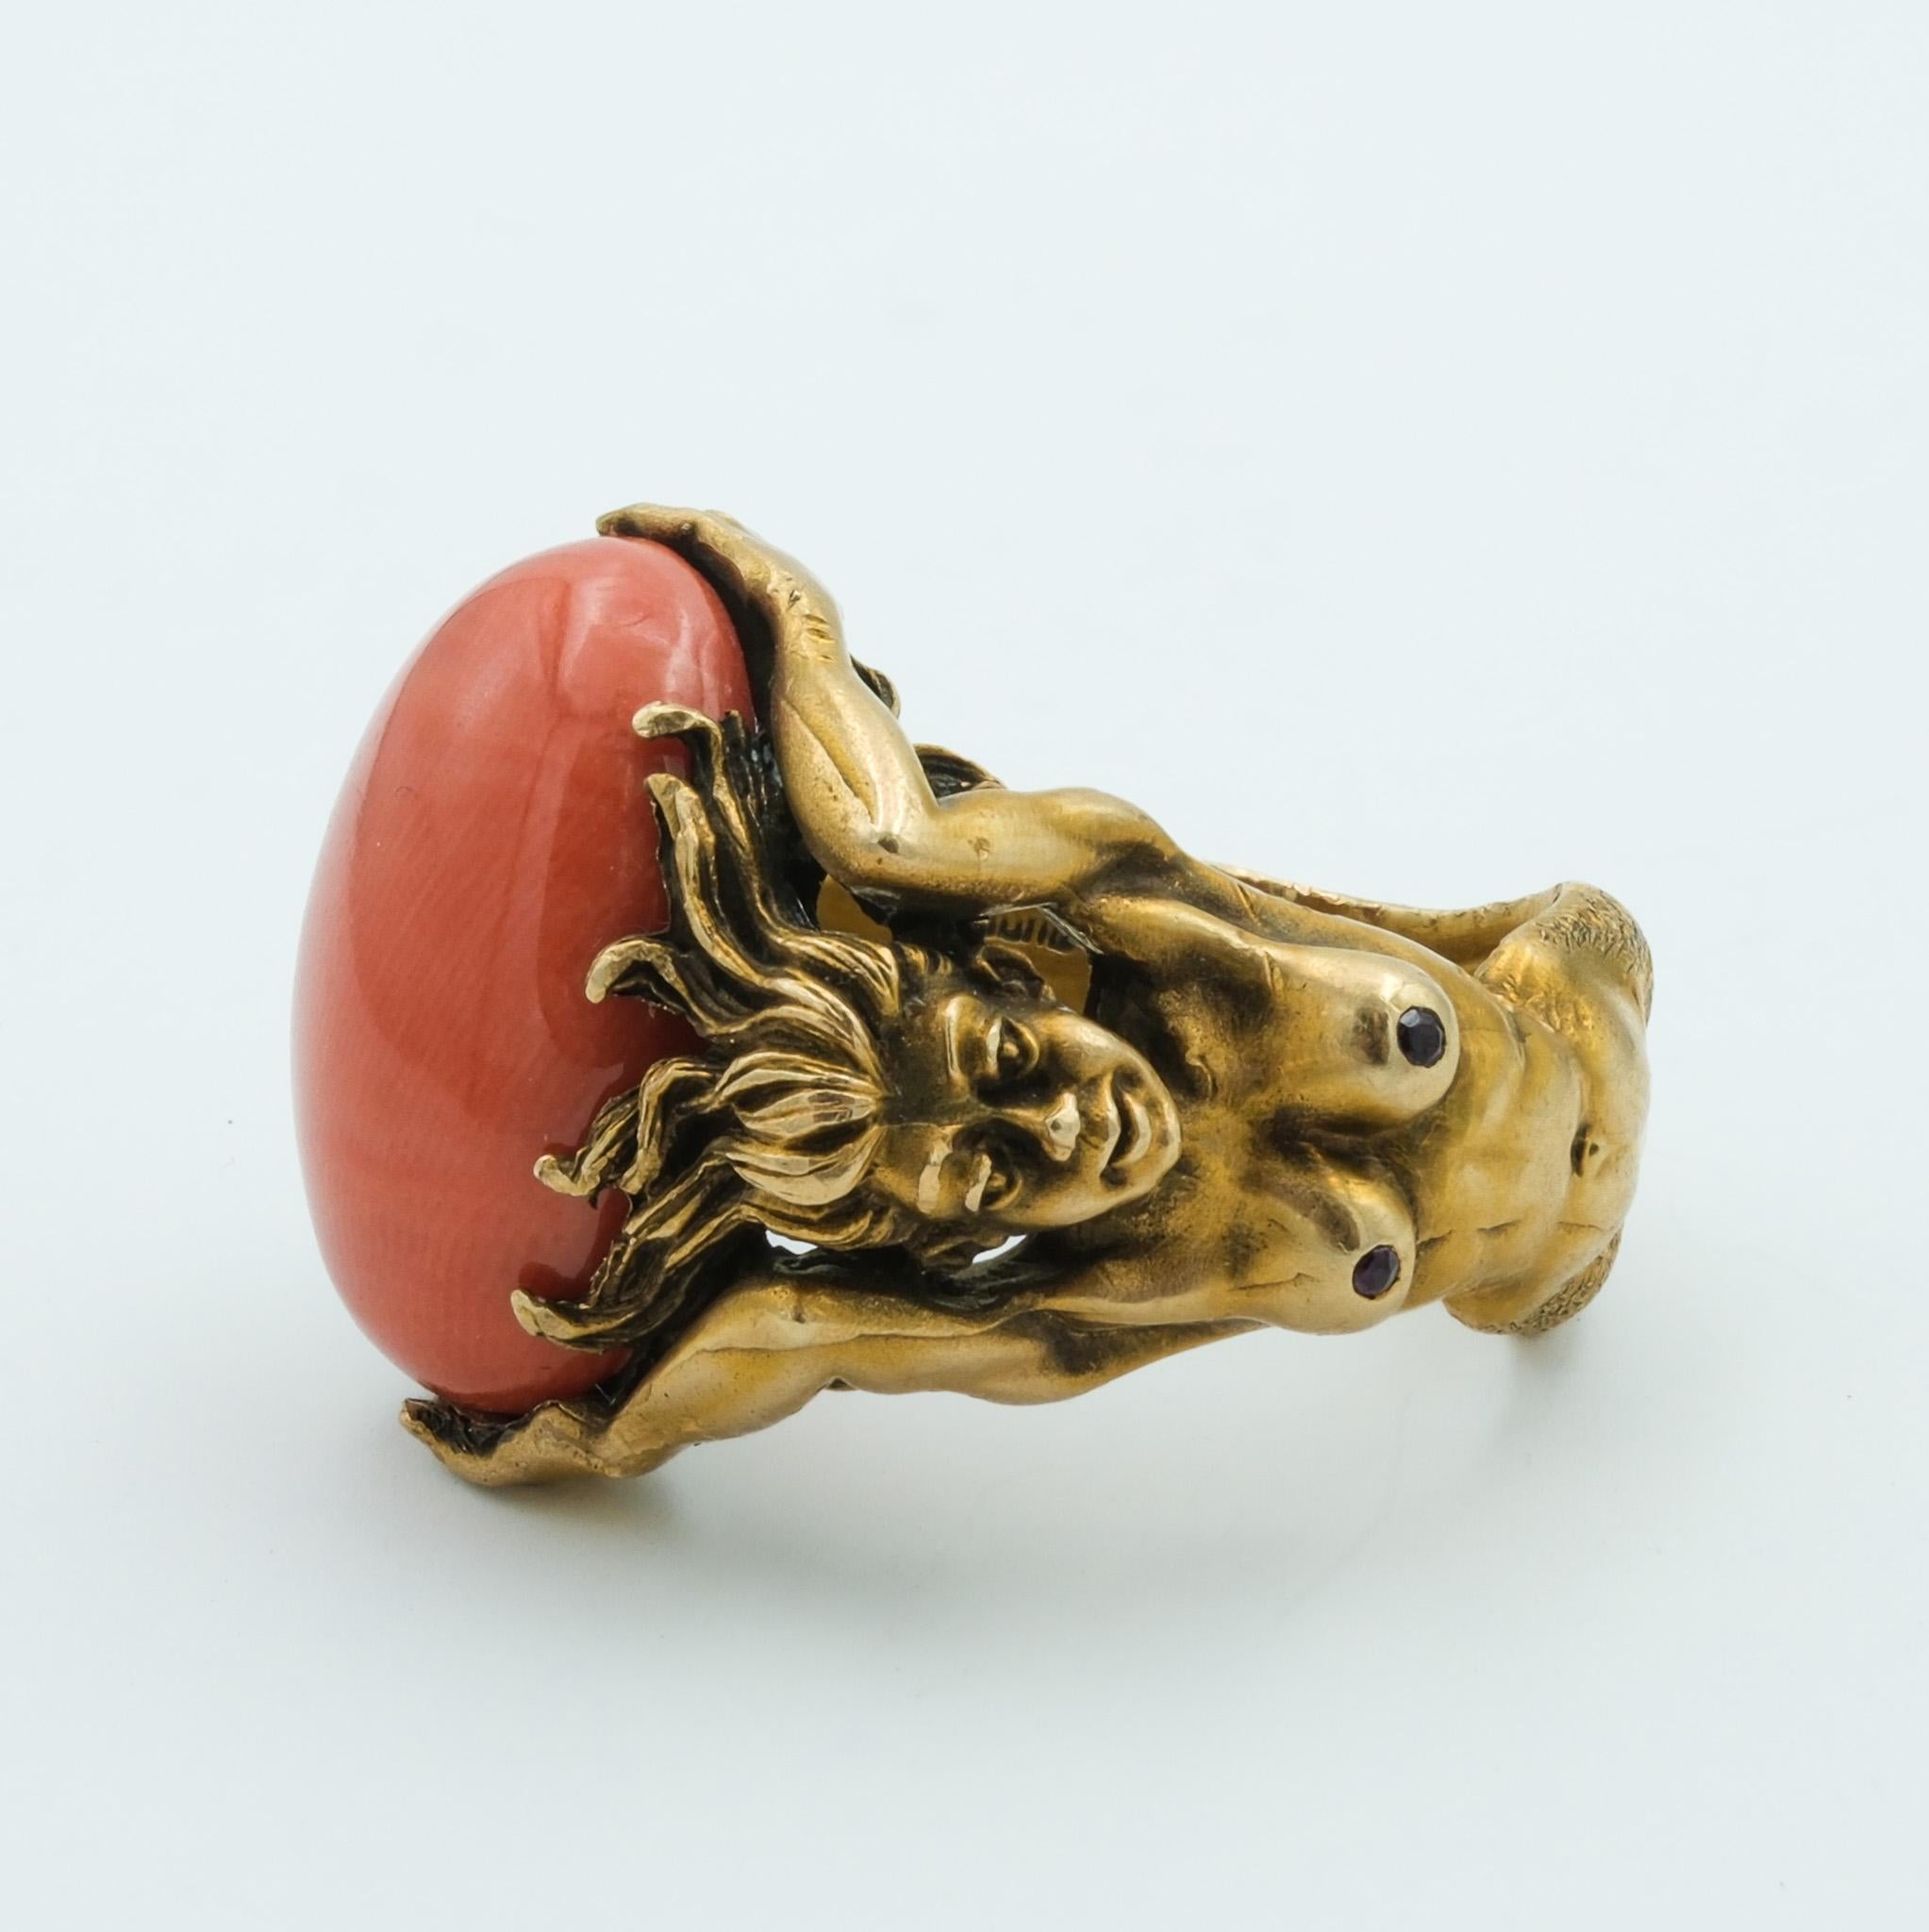 Cabochon Figural Artisan Mermaid Lady Ring with 12.8 carat Coral and Garnet Handmade For Sale